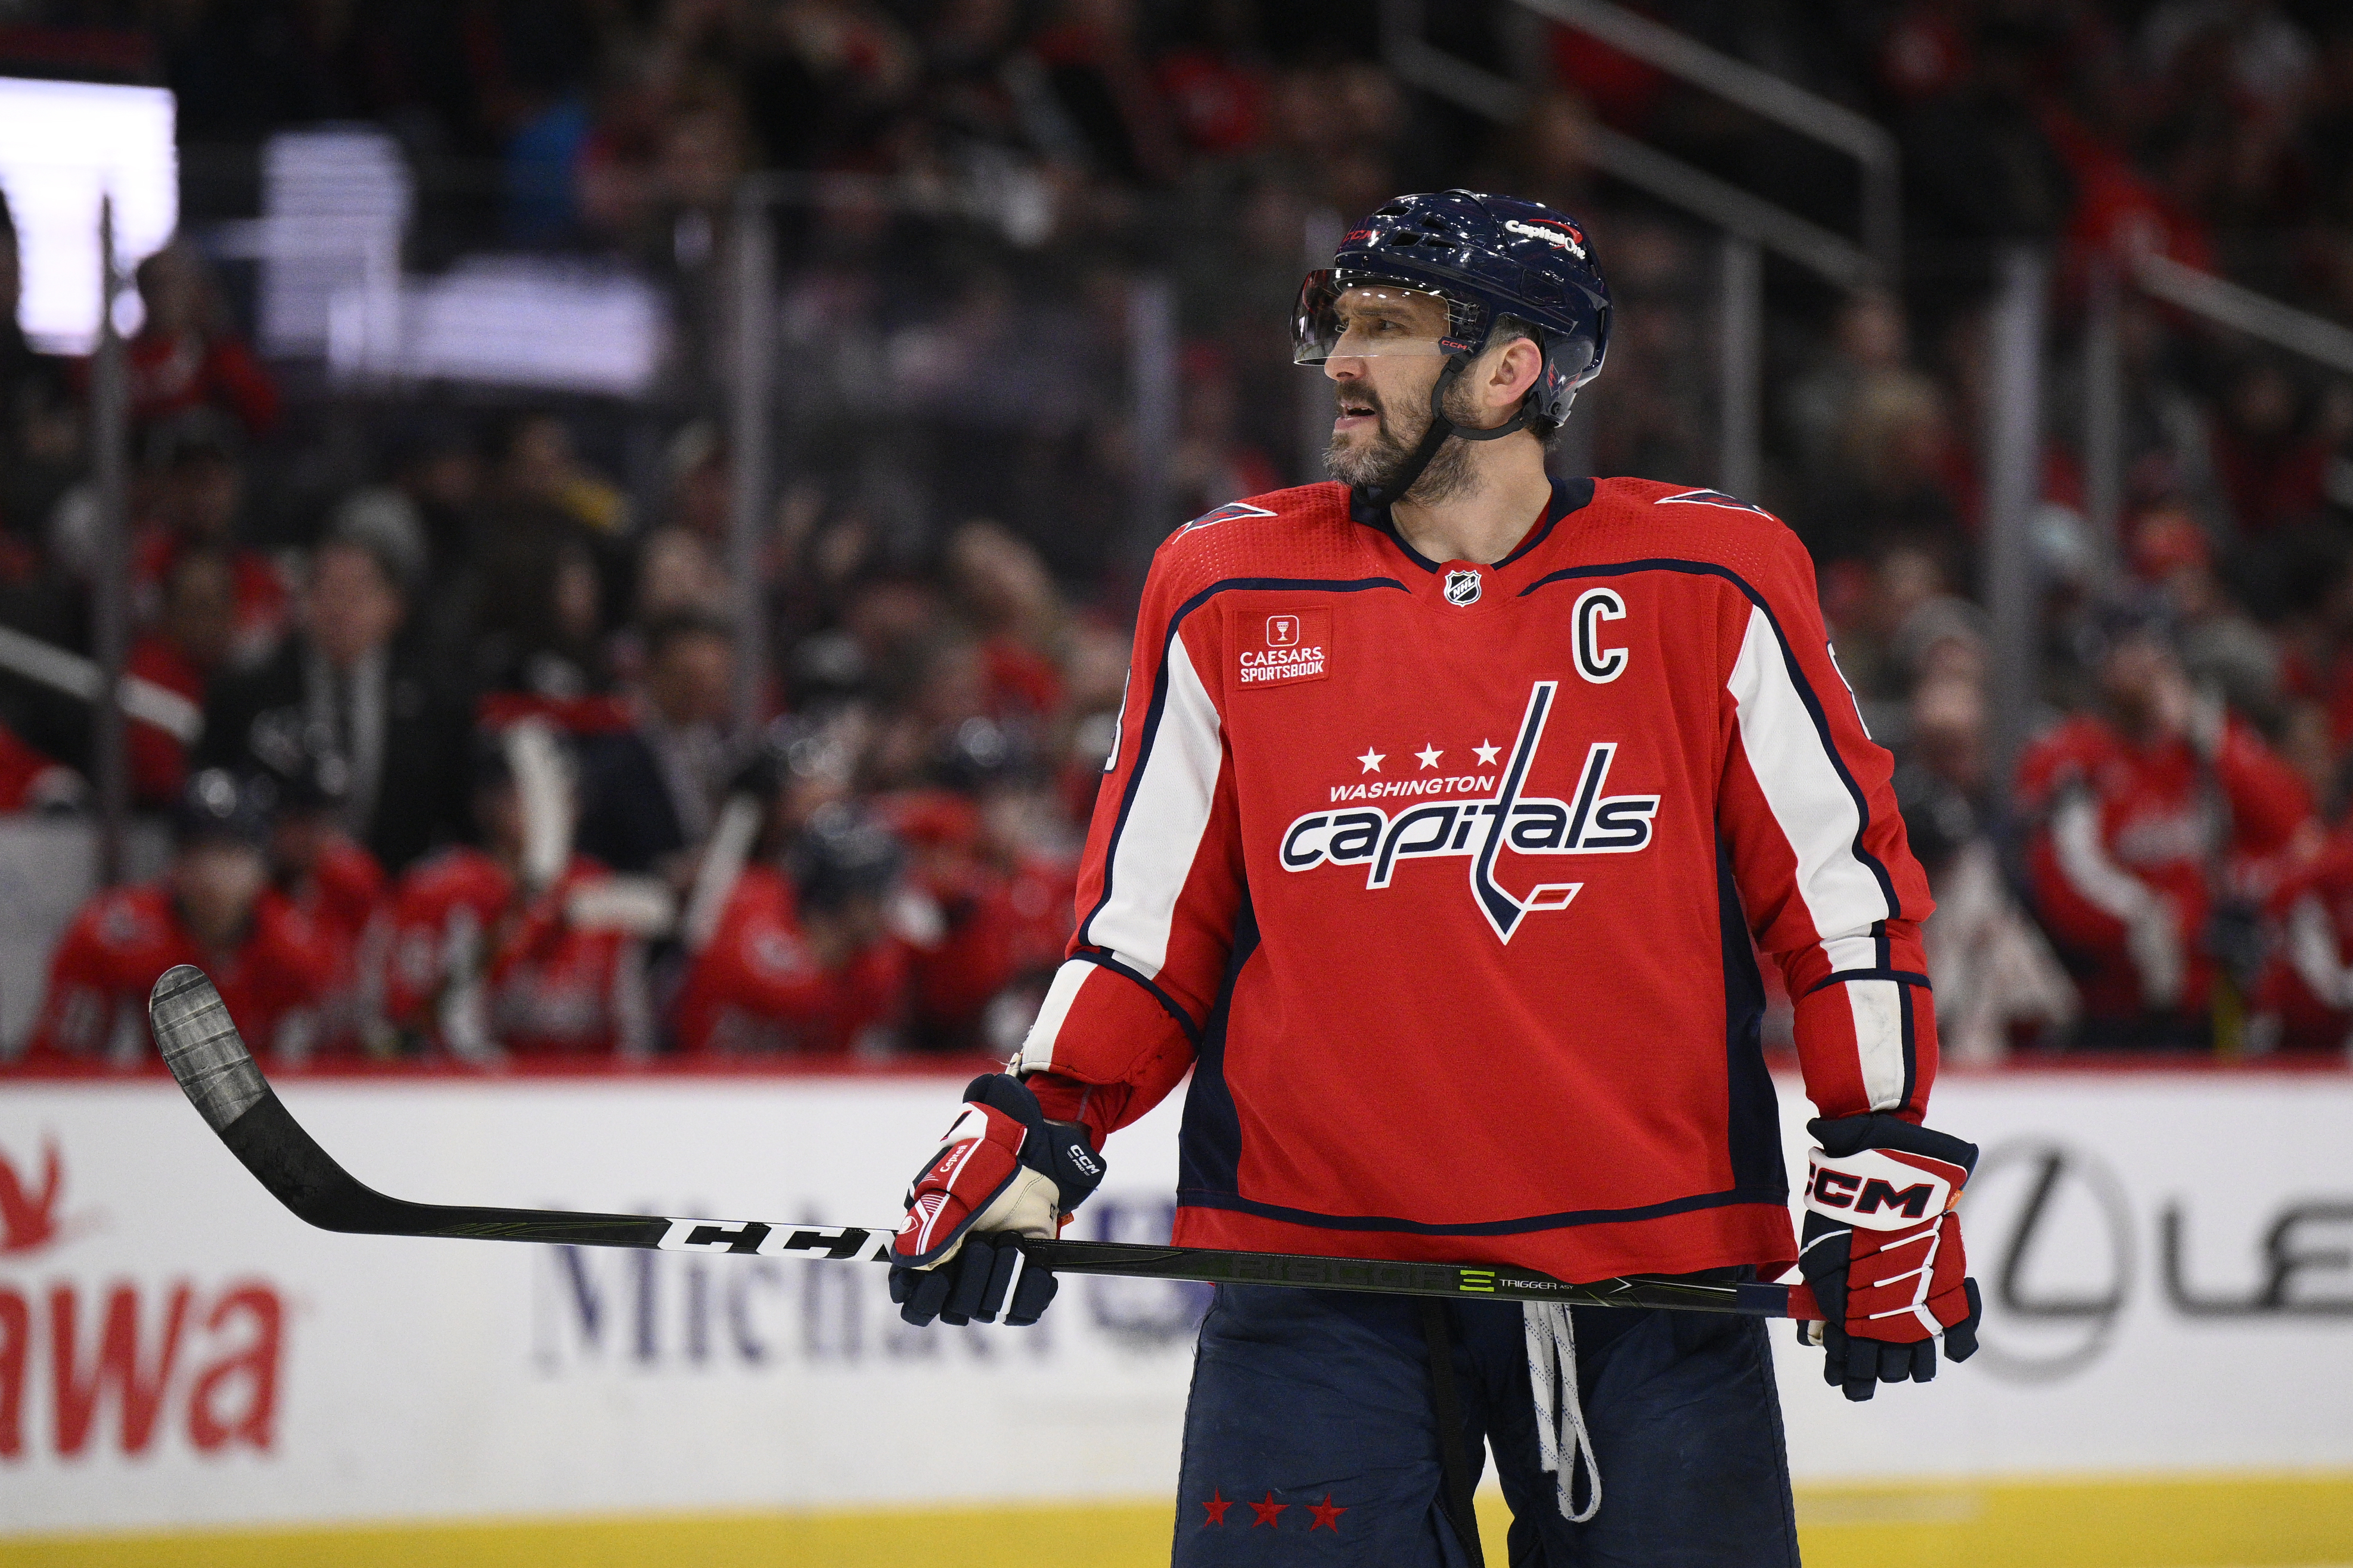 Capitals to wear special warmup jerseys for Black history night vs